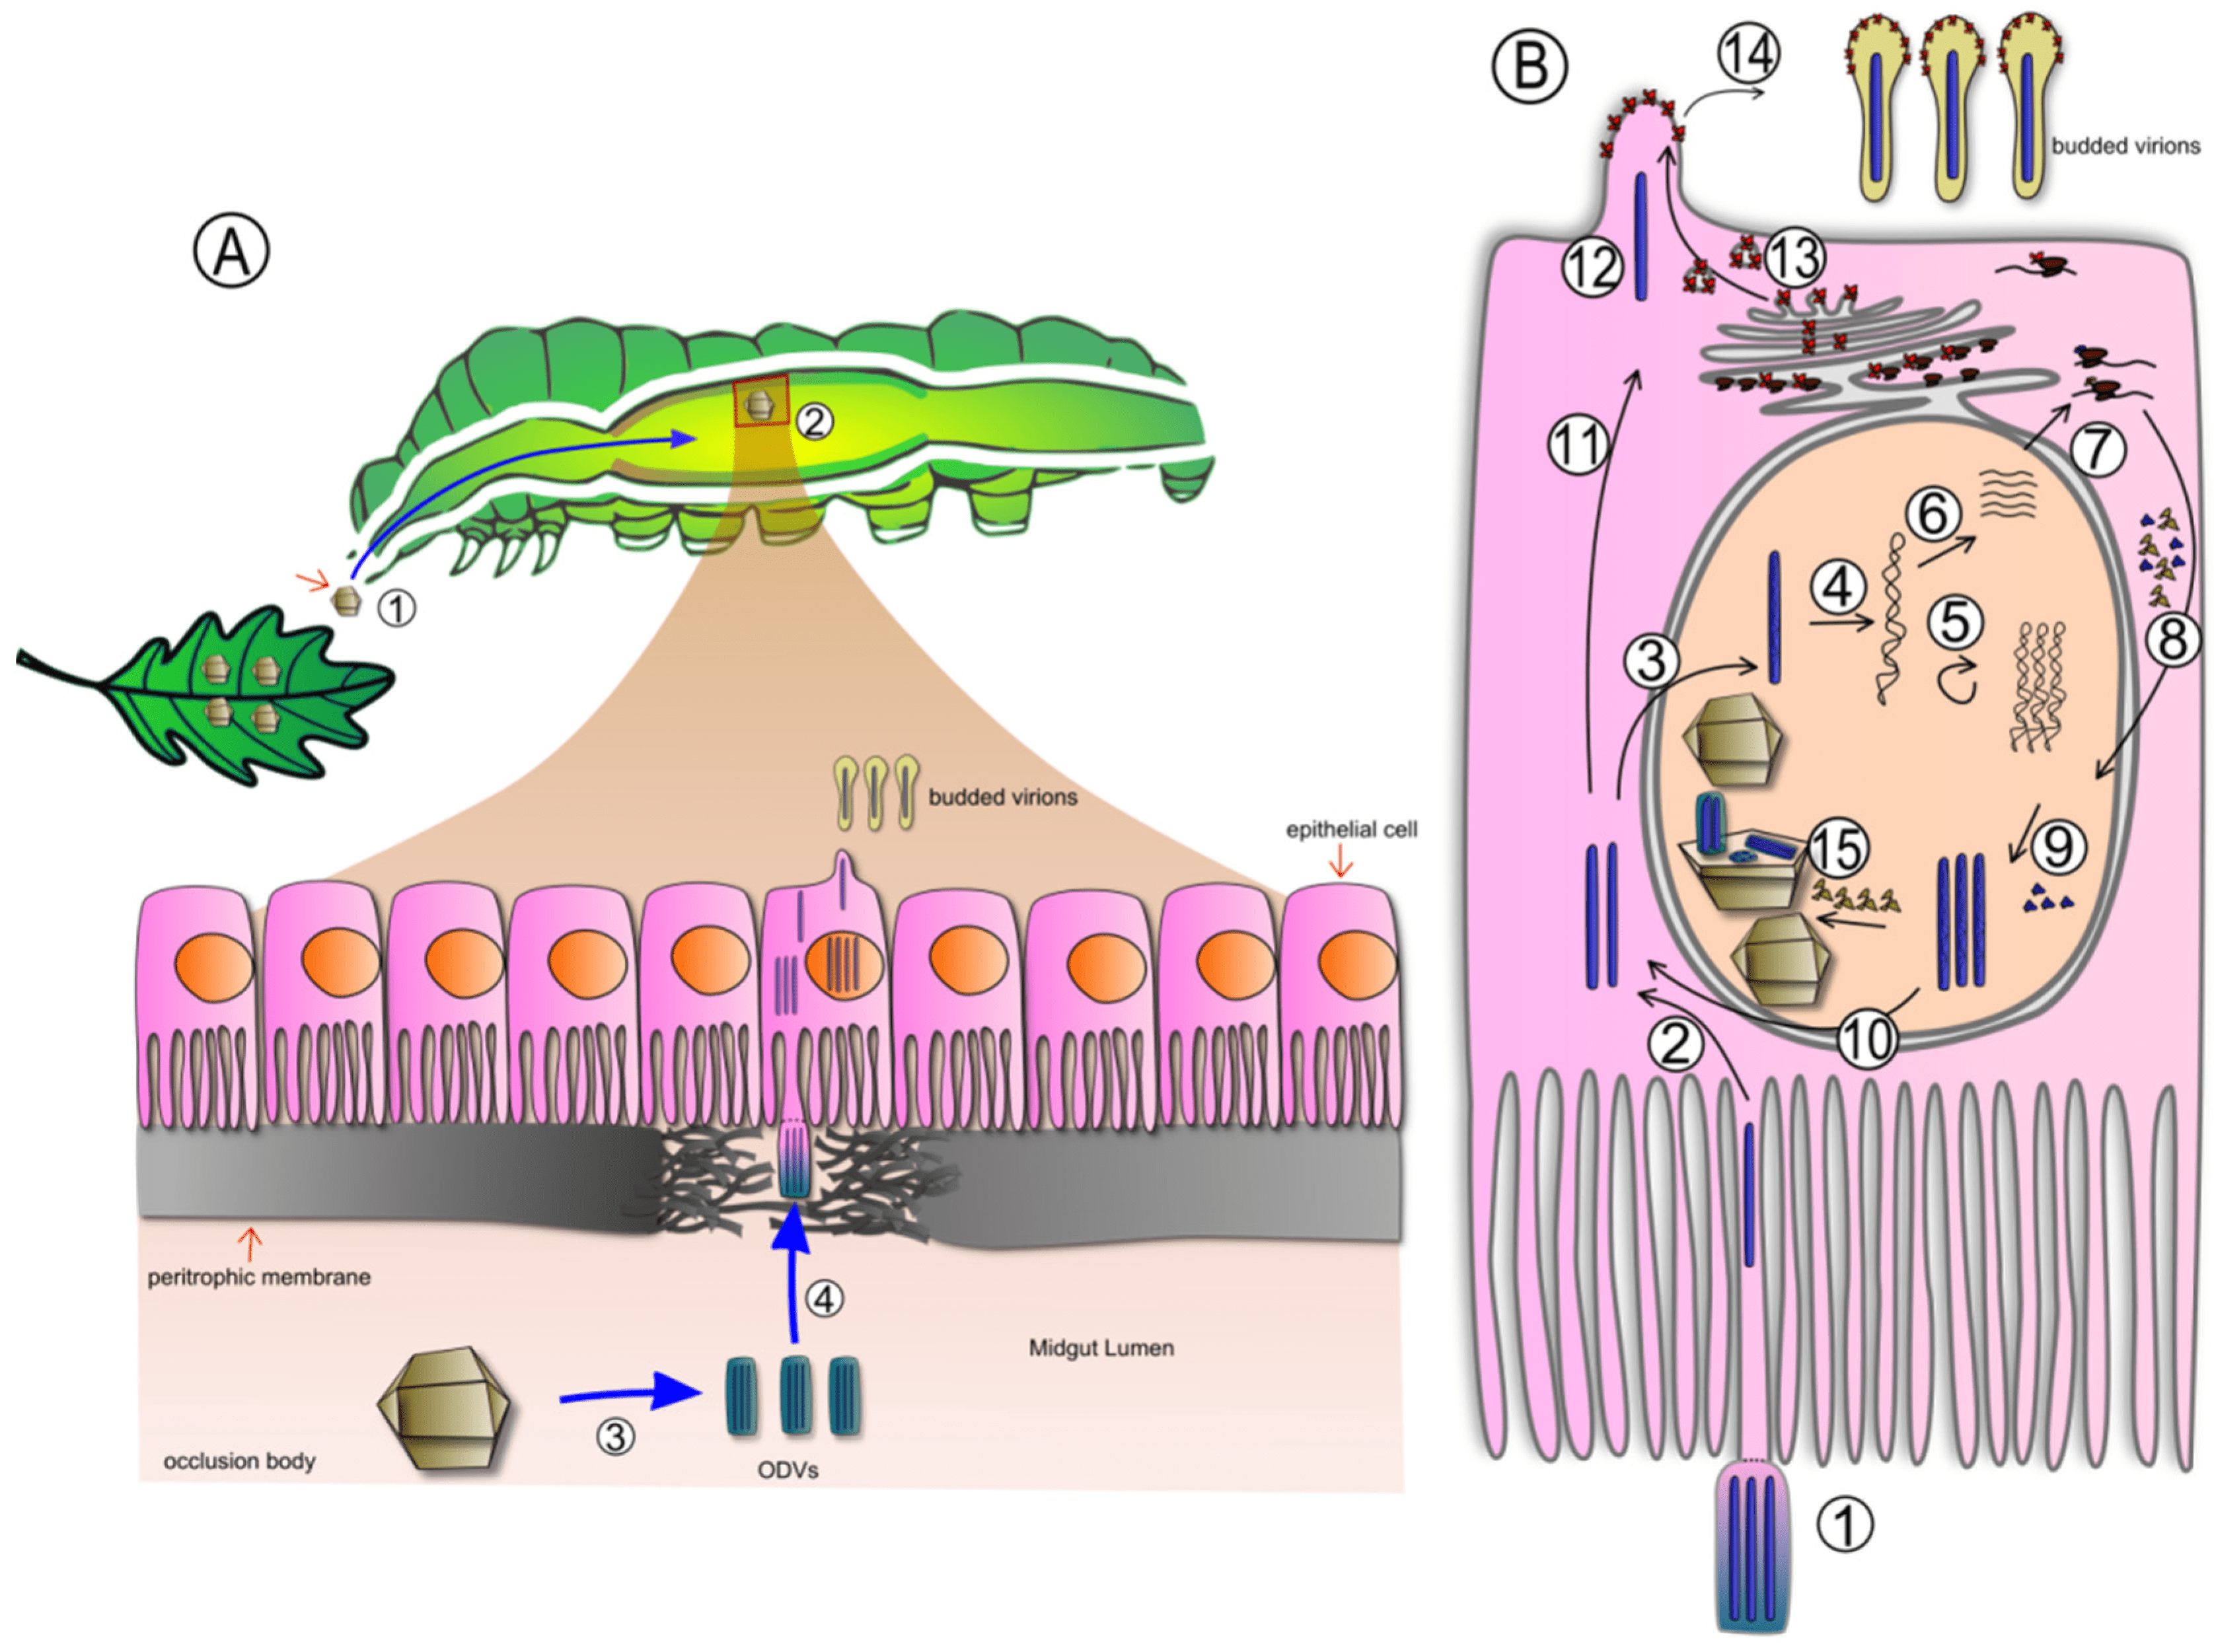 Diagram showing the infectious cycle of baculovirus. The panel on the left shows a cross-section of a caterpillar and the initial stages of infection. The panel on the right shows the life cycle of the virus within a host cell.